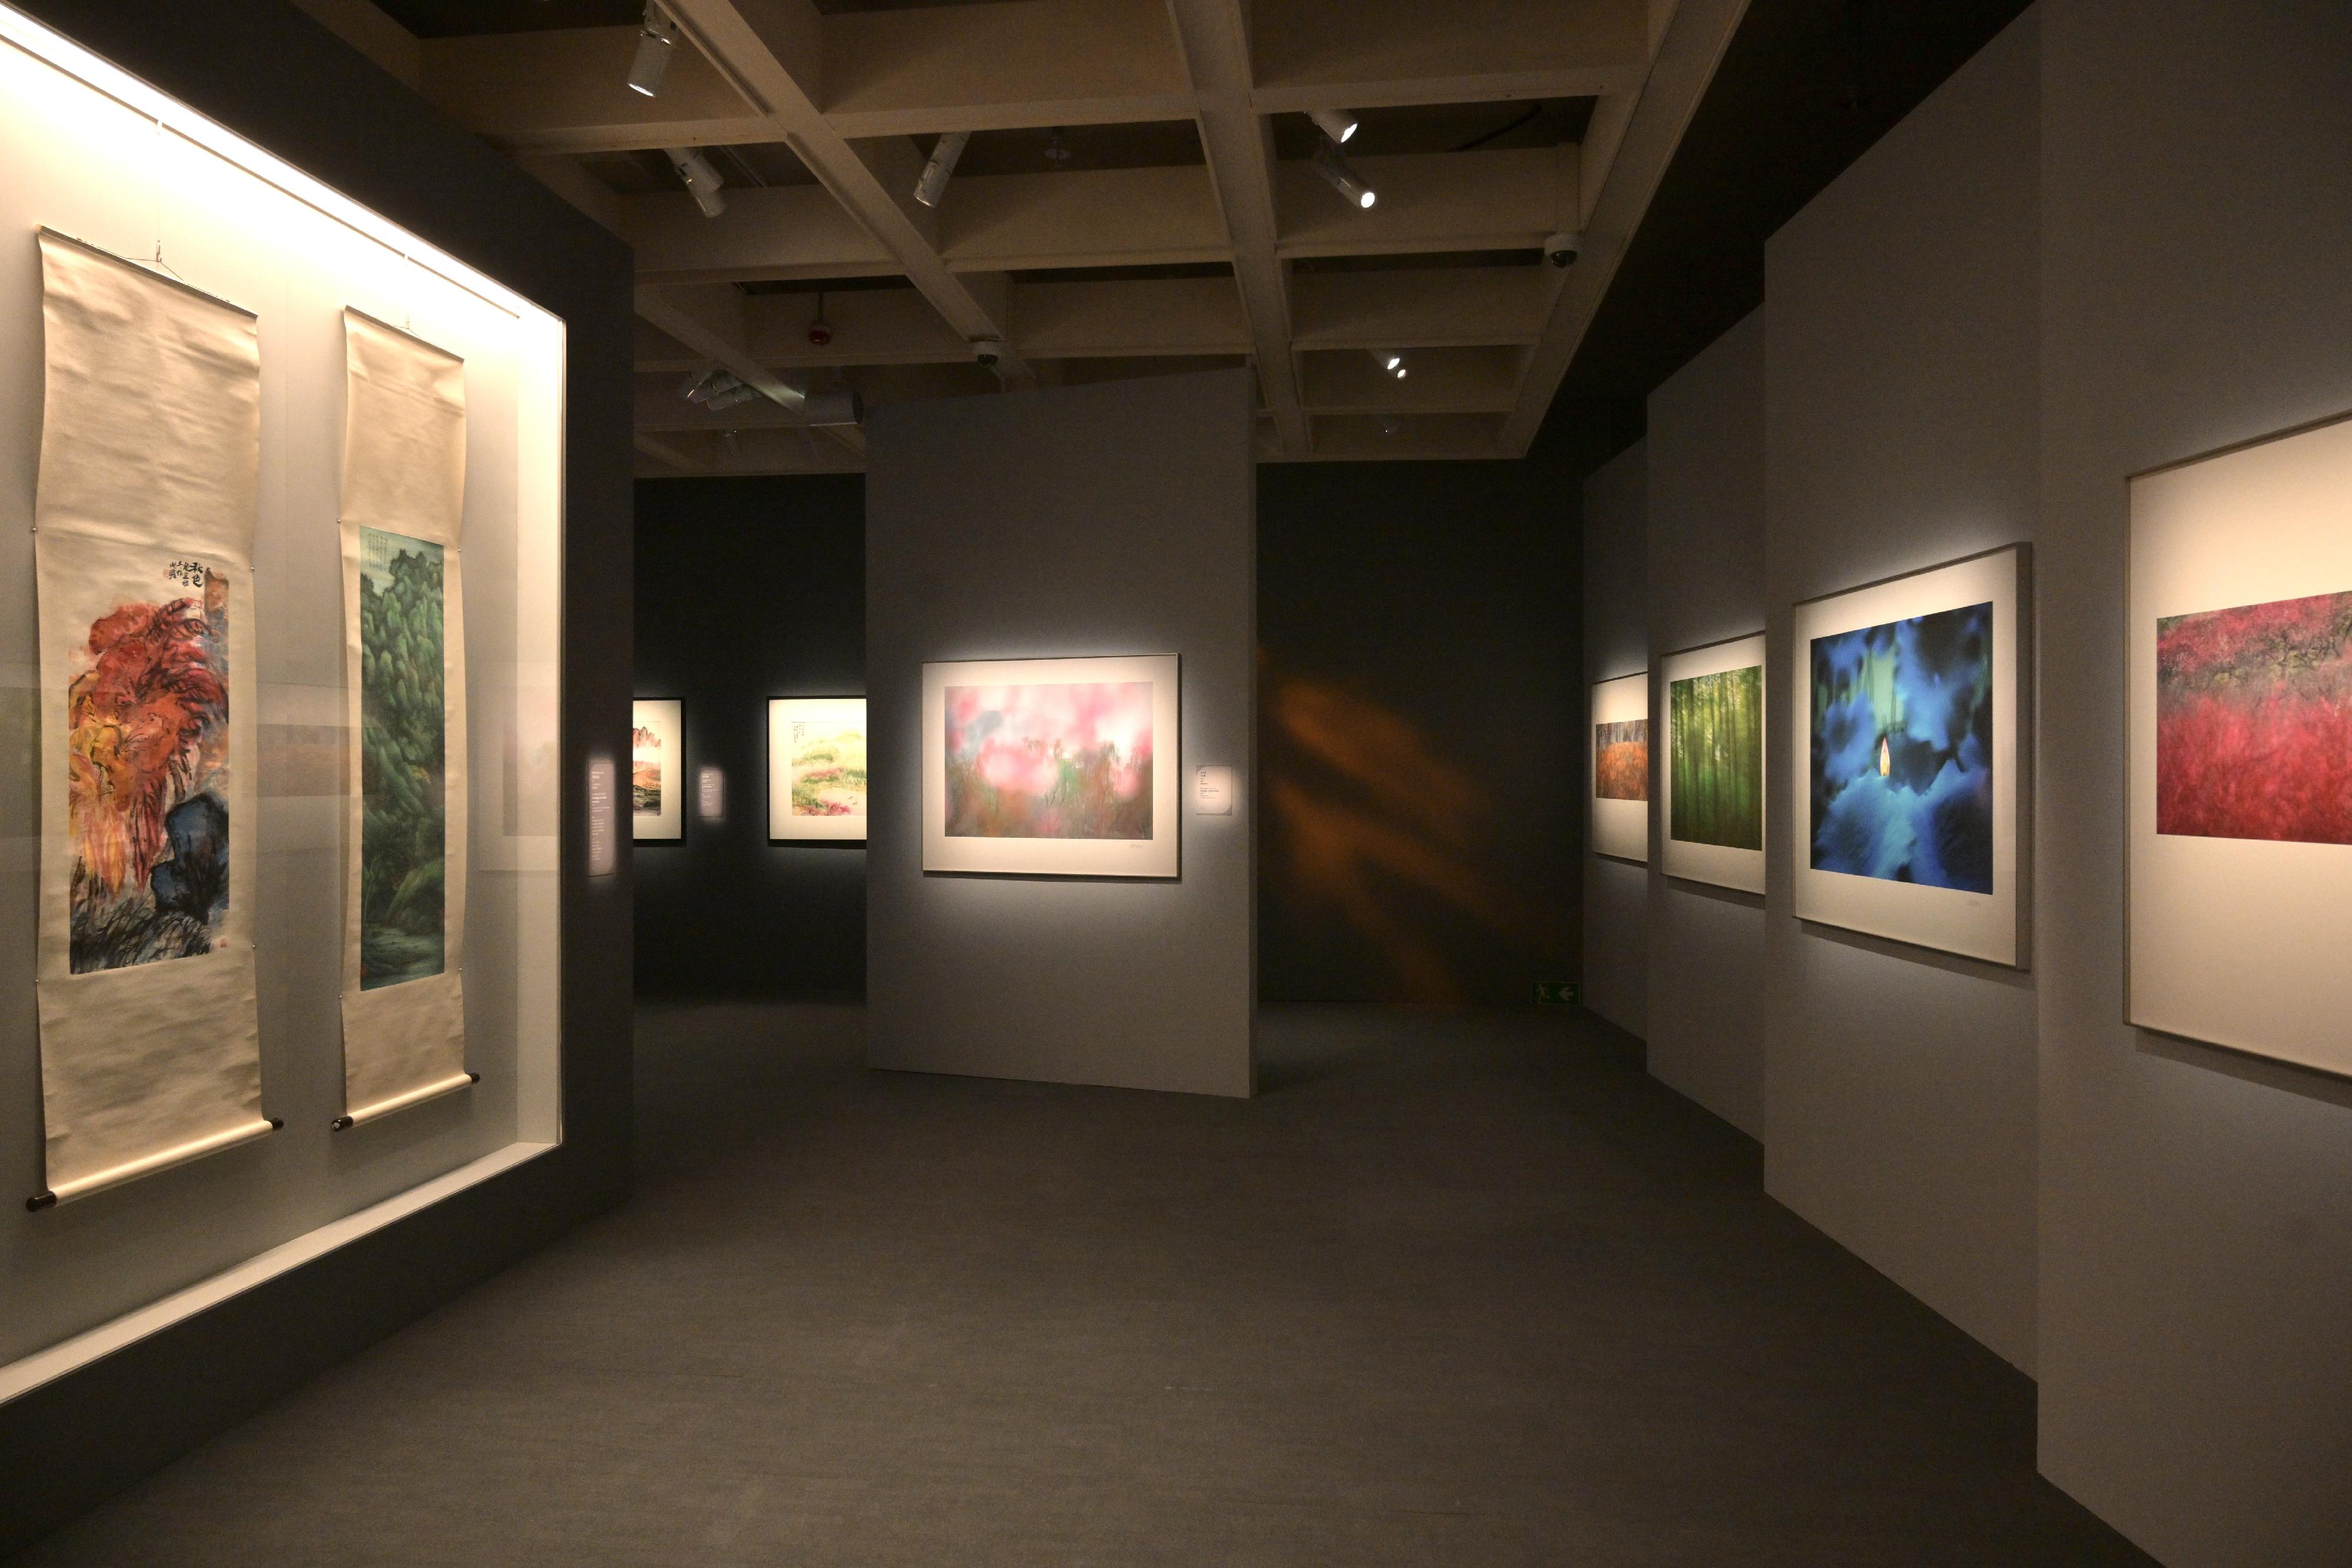 The Wu Guanzhong Art Sponsorship: Dialogue with 20th Century Chinese Art Series opened today (March 21) at the Hong Kong Museum of Art. Picture shows photographic works by renowned collector and photographer Dr Leo Wong and his collection of 20th century Chinese paintings and calligraphy in the "True Likeness: The Art and Collection of Jingguanlou" exhibition.